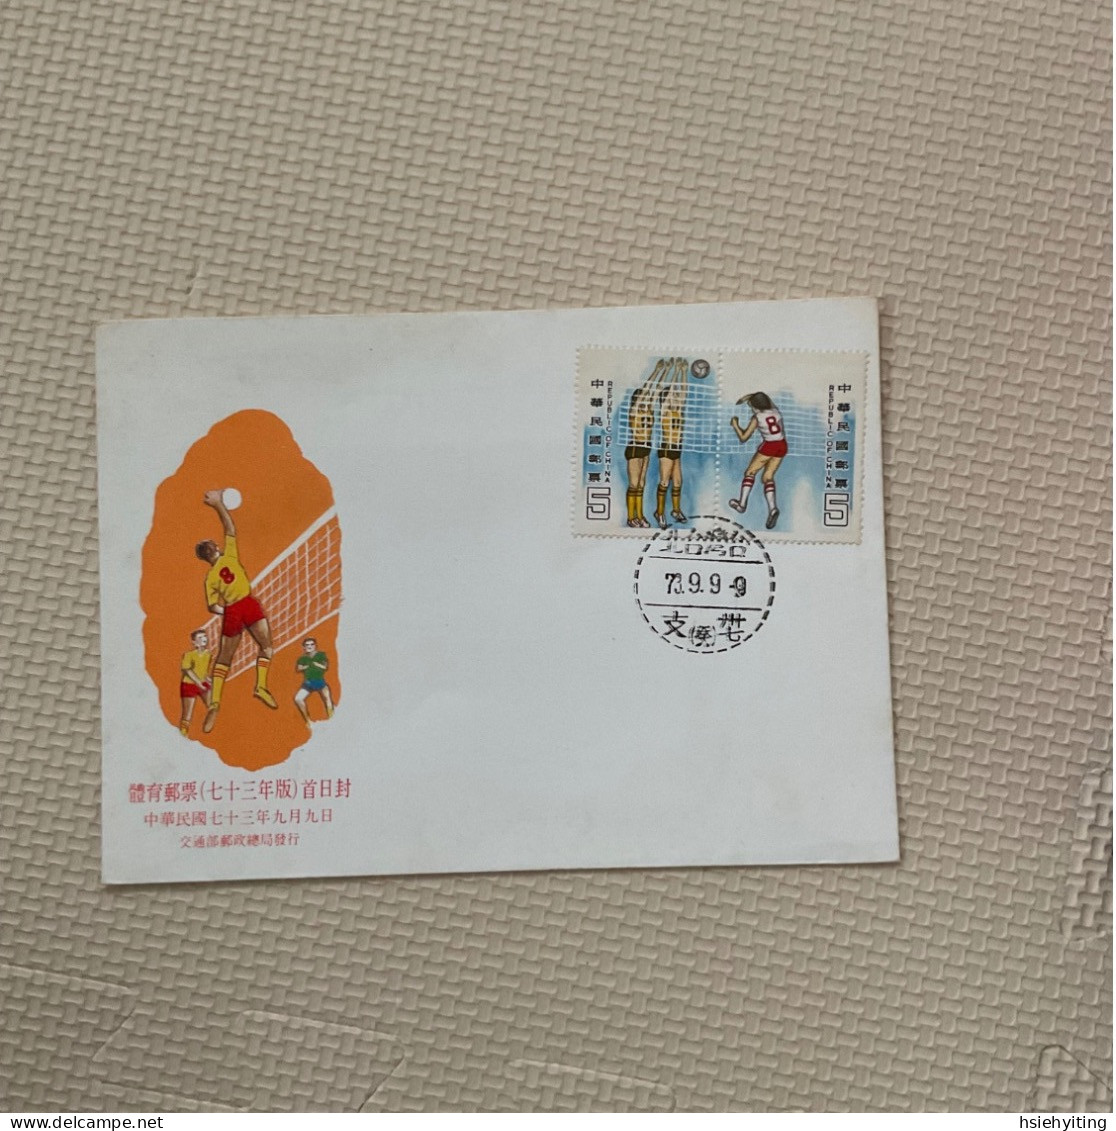 Taiwan Postage Stamps - Volleyball